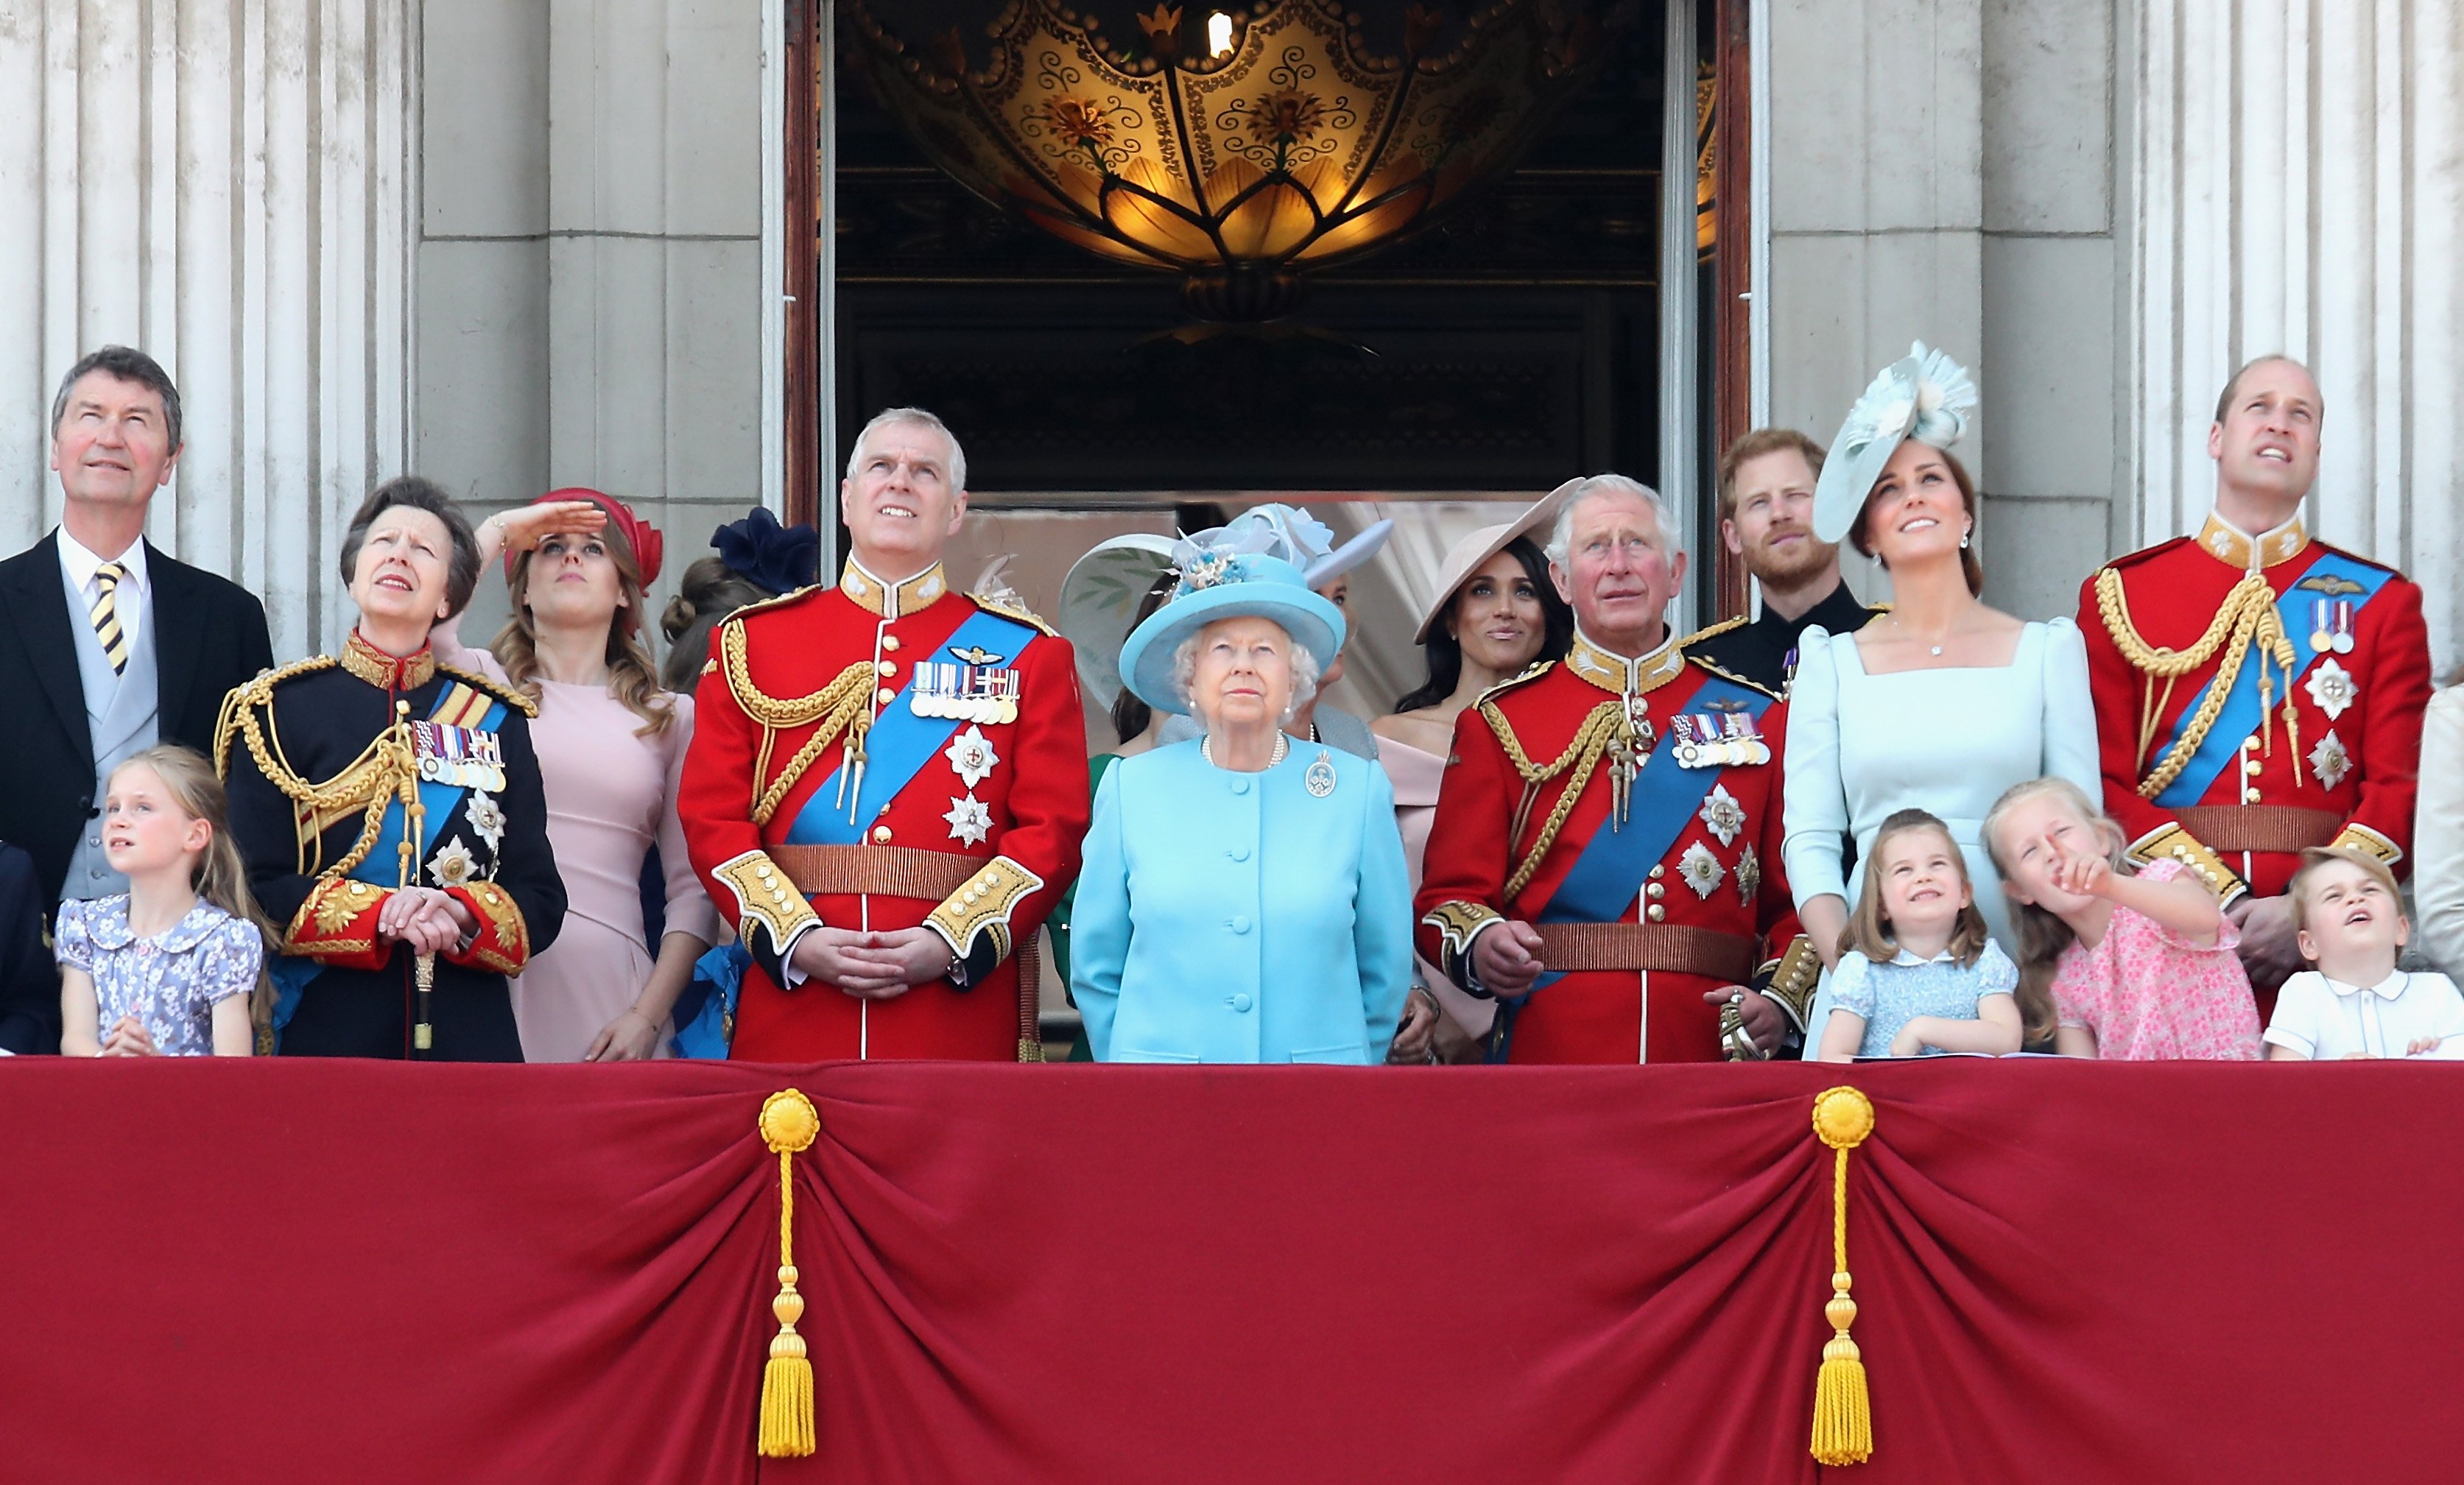 Princess Anne, Princess Beatrice, Prince Andrew, Queen Elizabeth II, Meghan Markle, Prince Charles, Prince Harry, Kate Middleton, Prince William, Princess Charlotte, Savannah Phillips, Prince George, and Isla Phillips during Trooping The Colour on June 9, 2018 in London, England. / Source: Getty Images